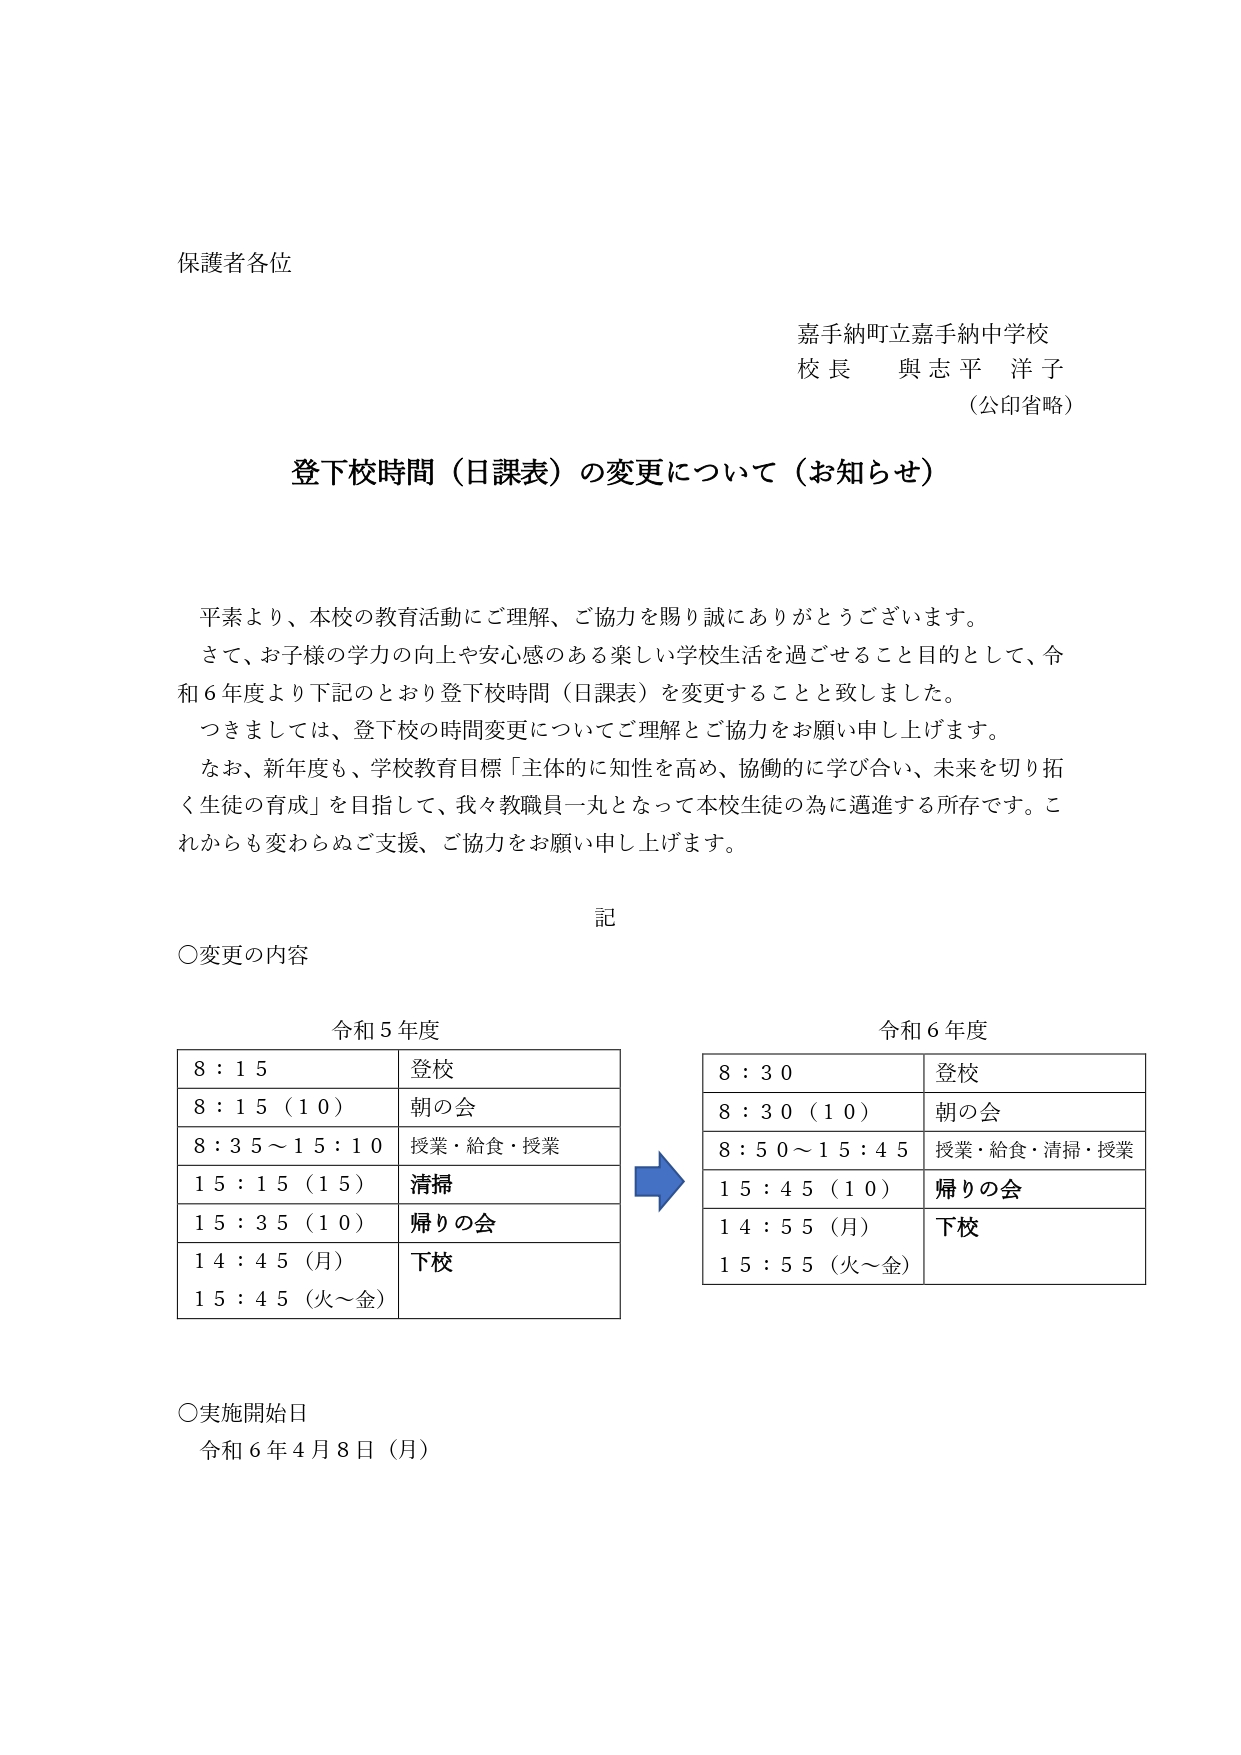 R6年度 登下校時間(日課表)変更のお知らせ.docx_page-0001